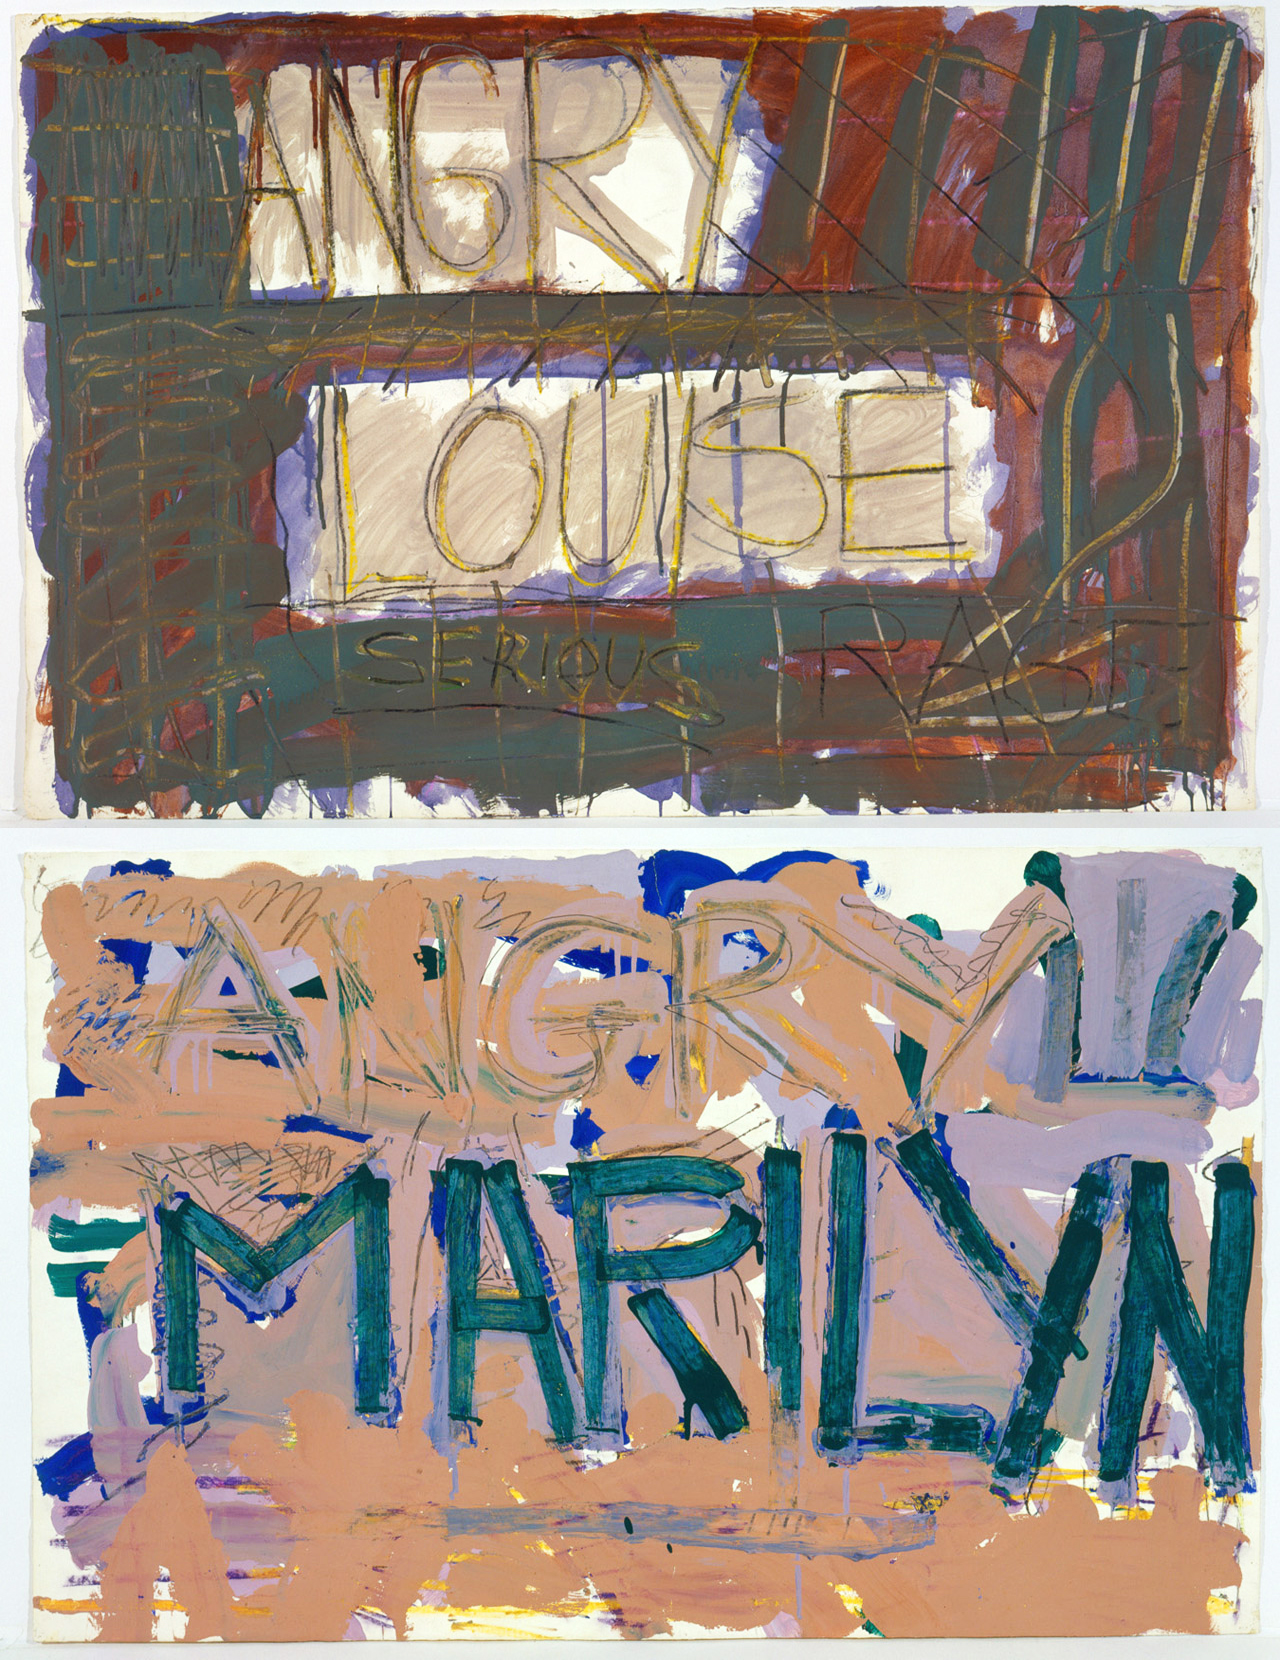 A photo of two abstract paintings with words "ANGRY LOUISE", "SERIOUS RAGE", and "ANGRY MARILYN" in different colors.